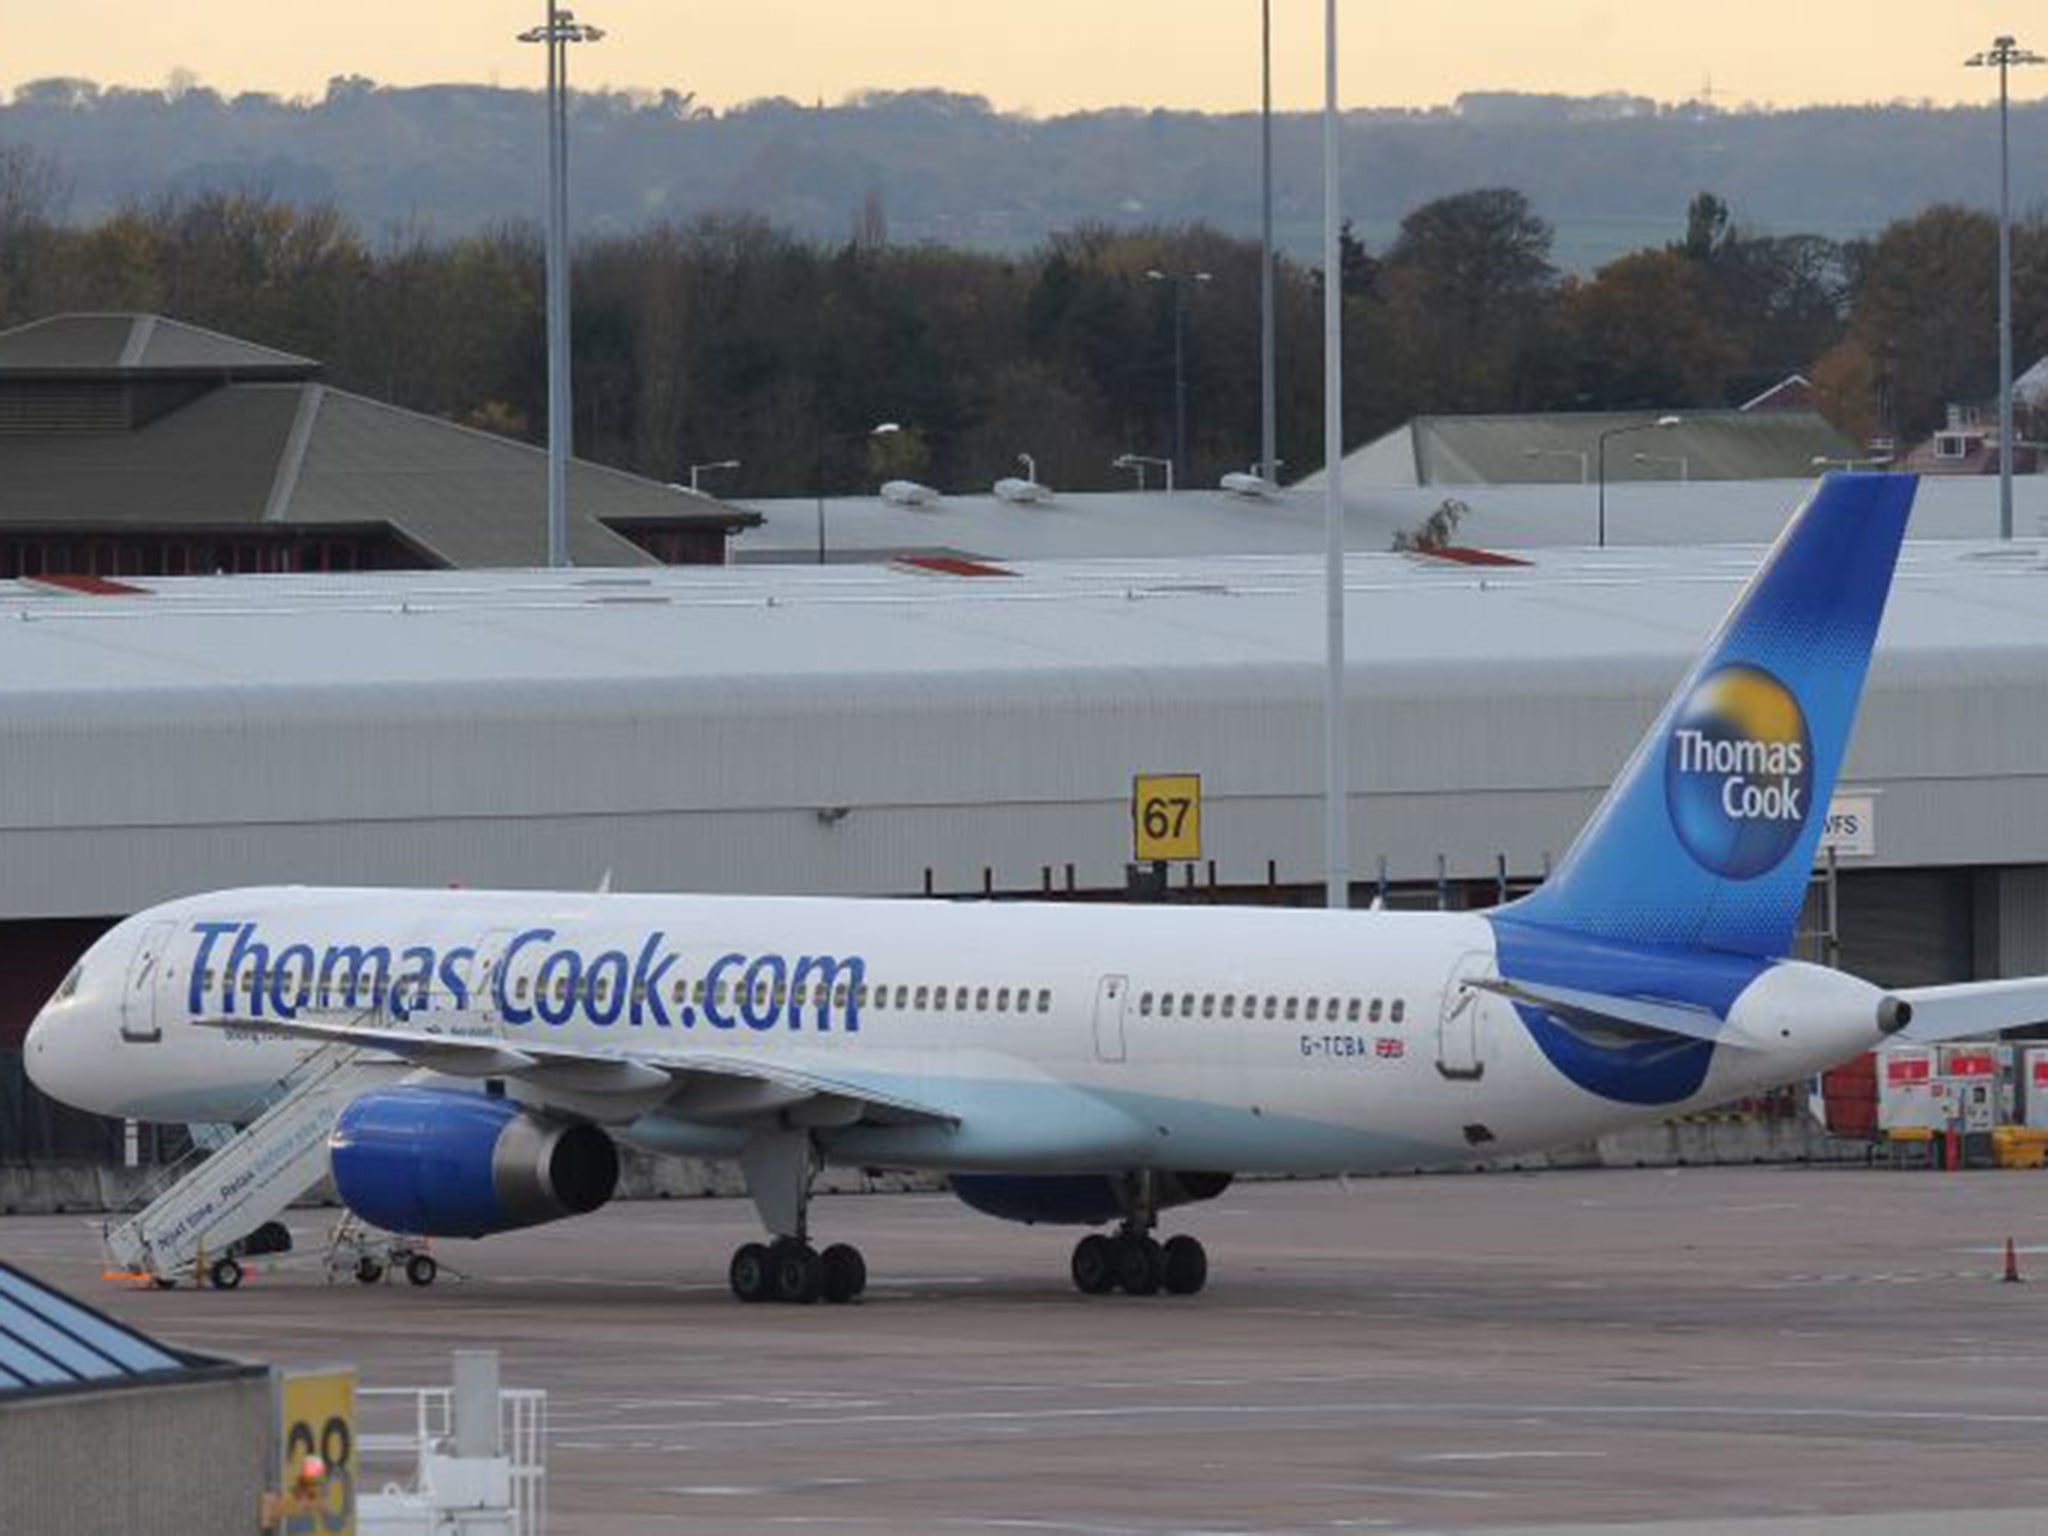 Thomas Cook said its poor results could be due to it not cancelling flights